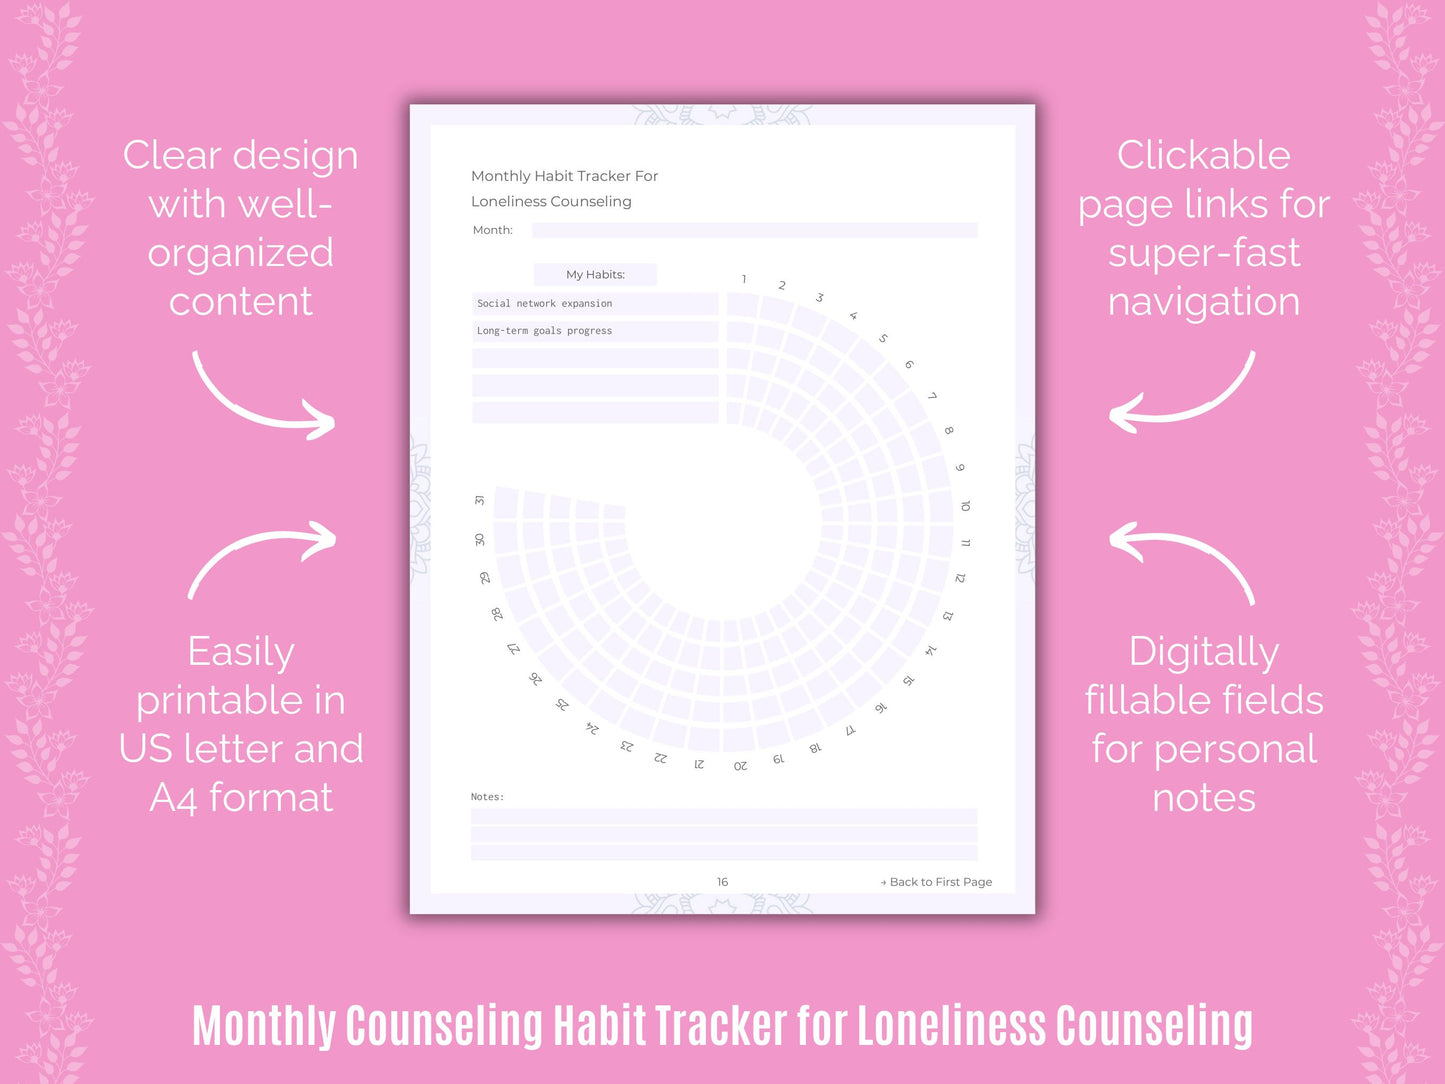 Loneliness Counseling Cards